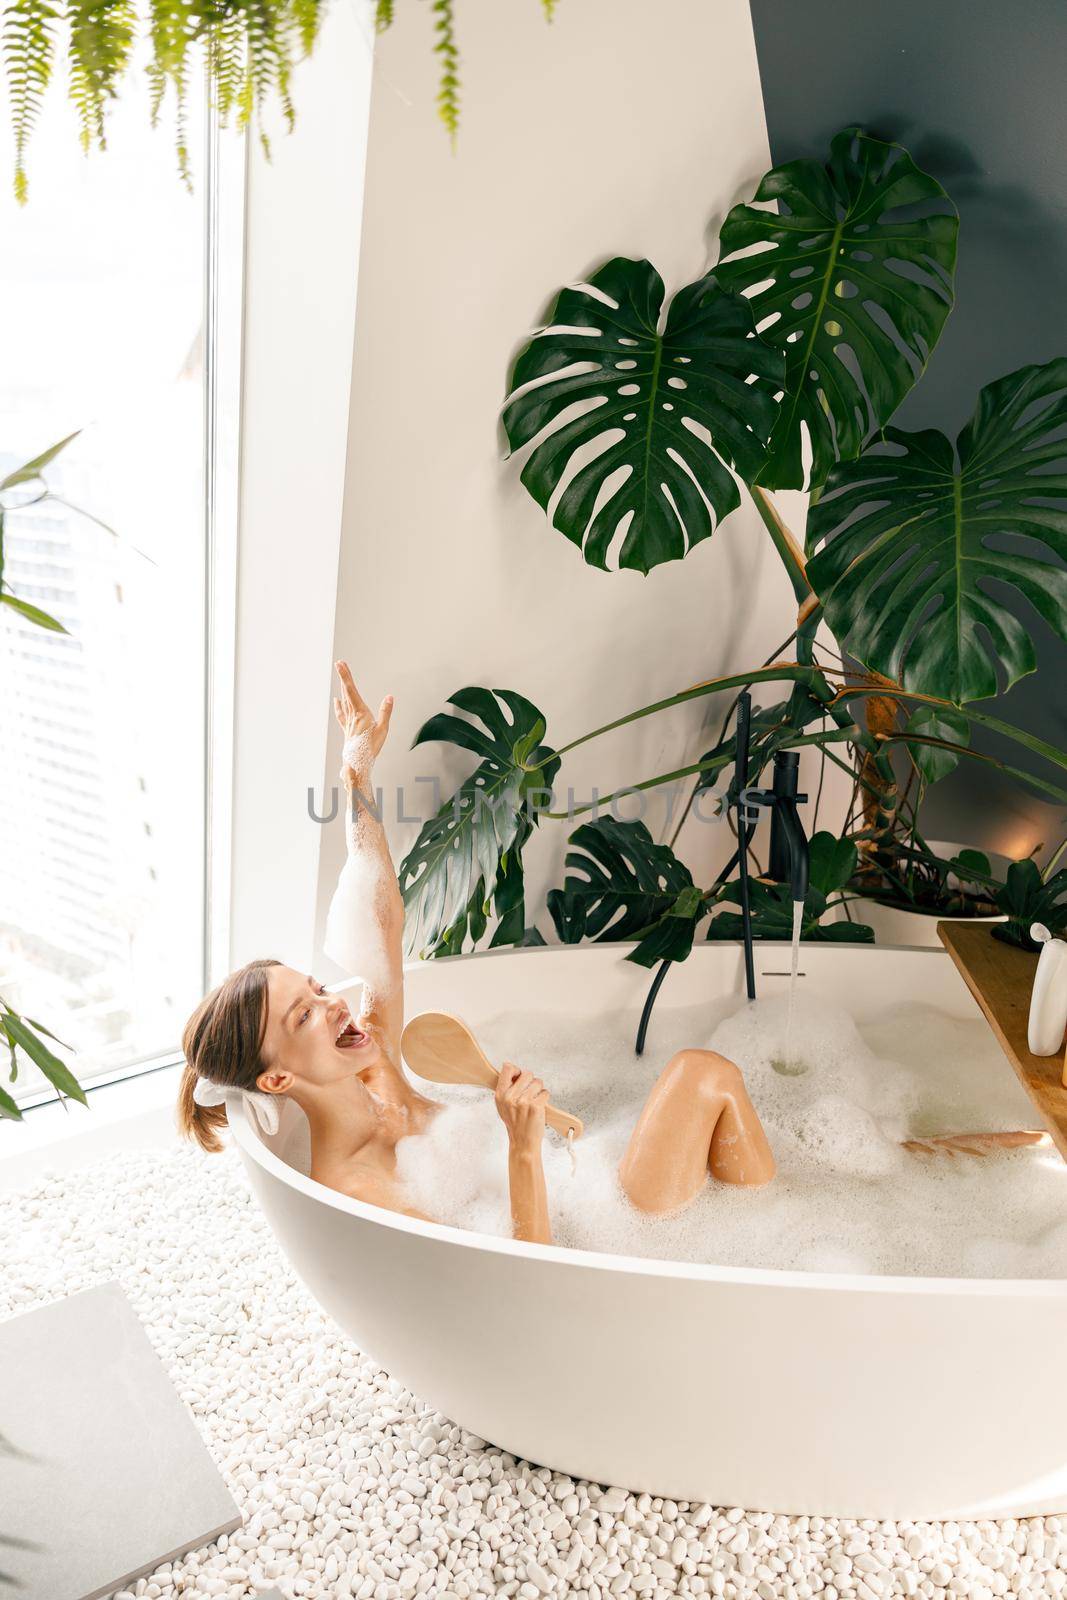 Cute young woman singing into a brush while bathing in the bathtub decorated with tropical plant. Wellness, body care concept